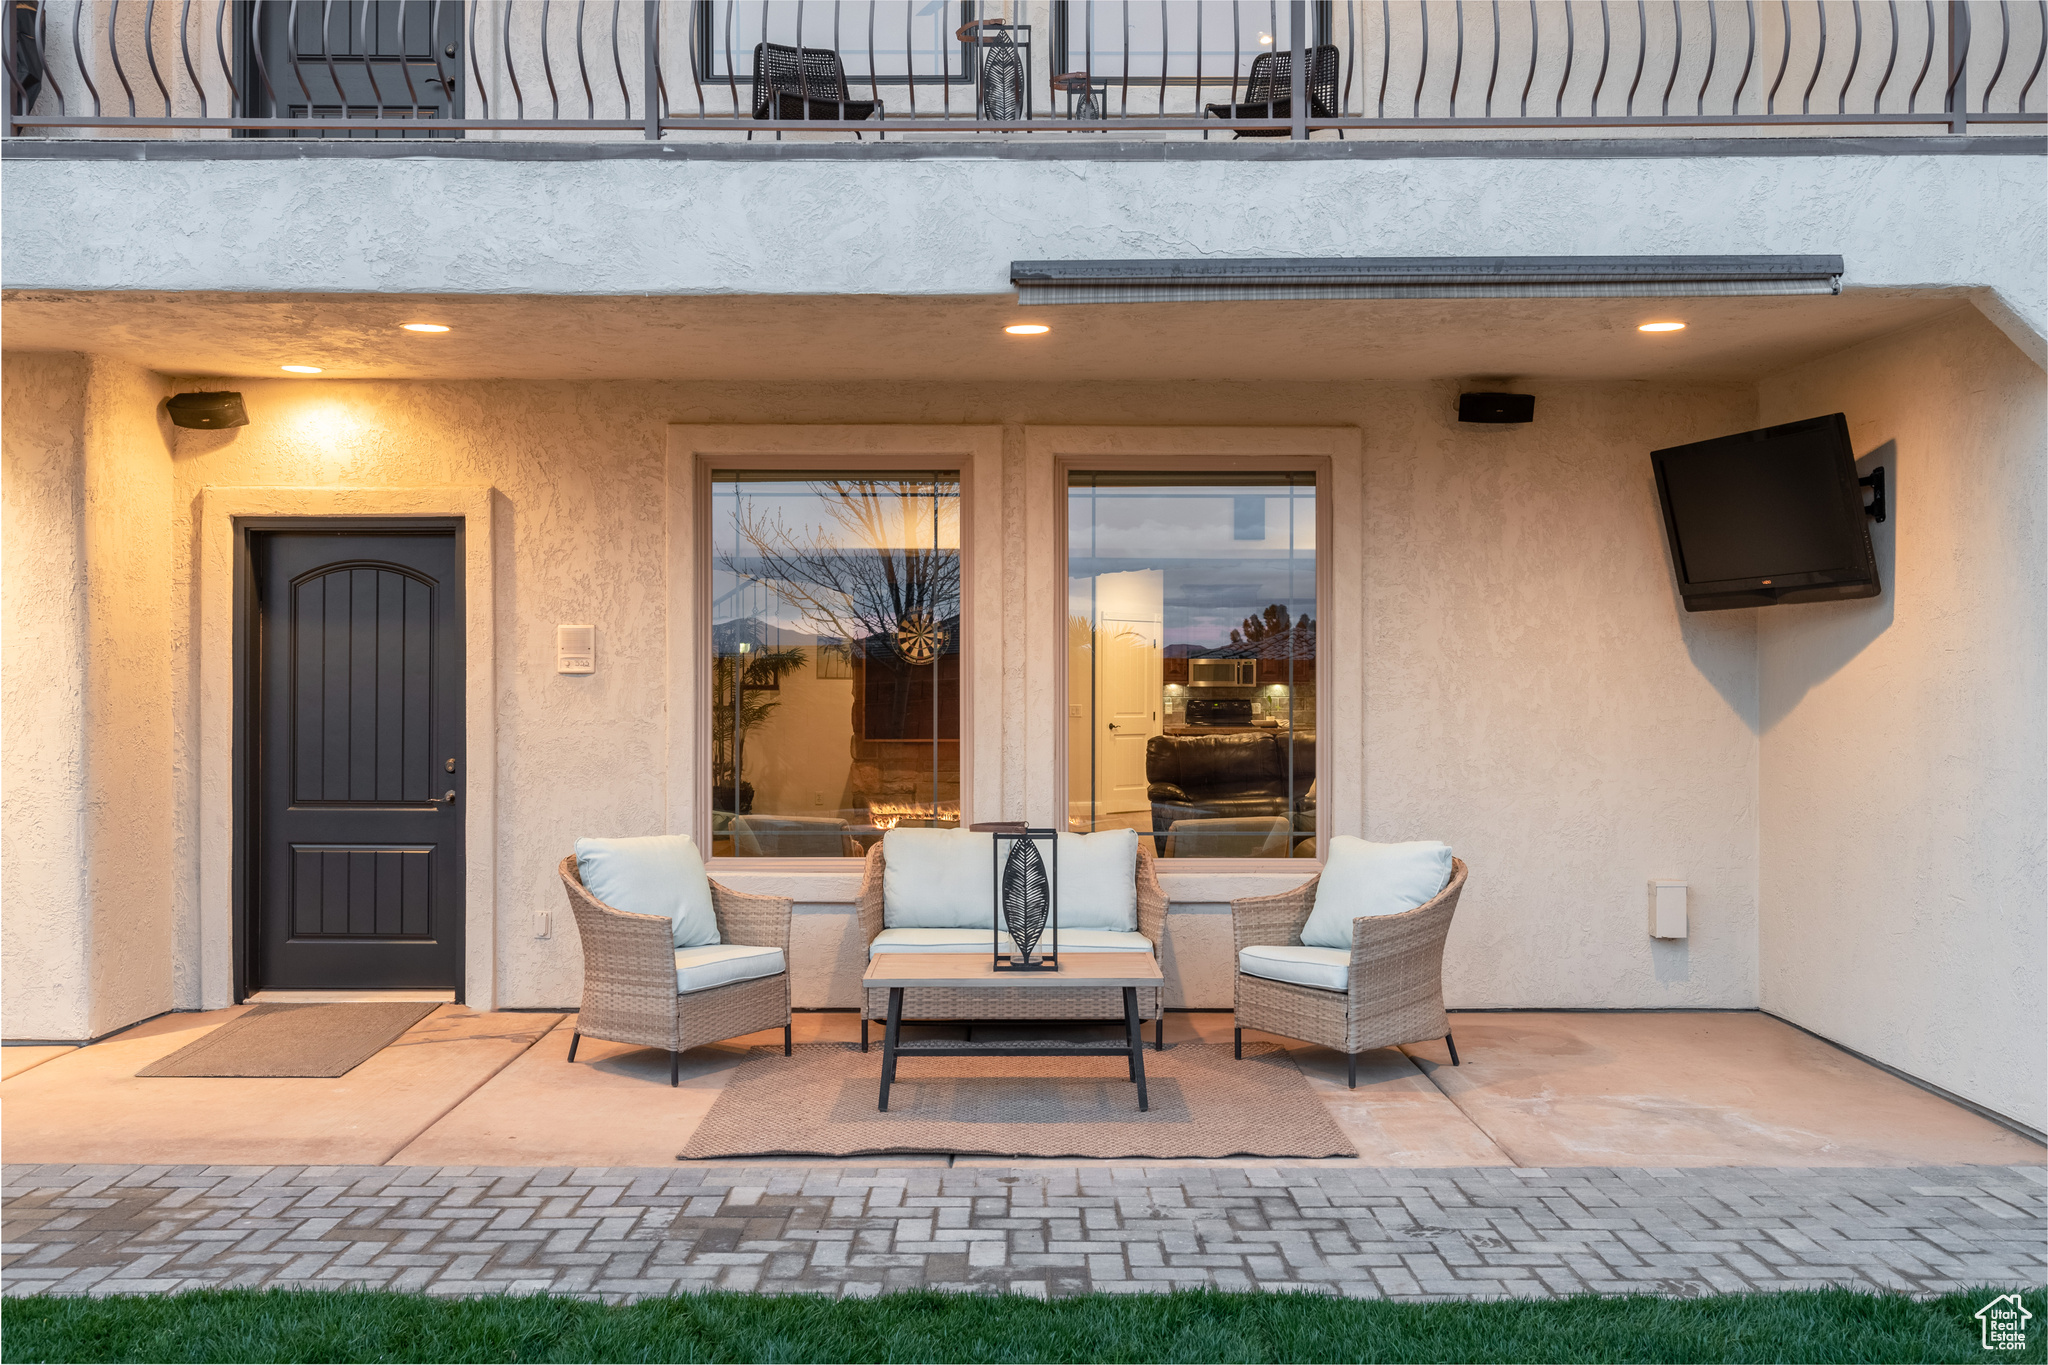 Doorway to property featuring a balcony, a patio, and outdoor lounge area